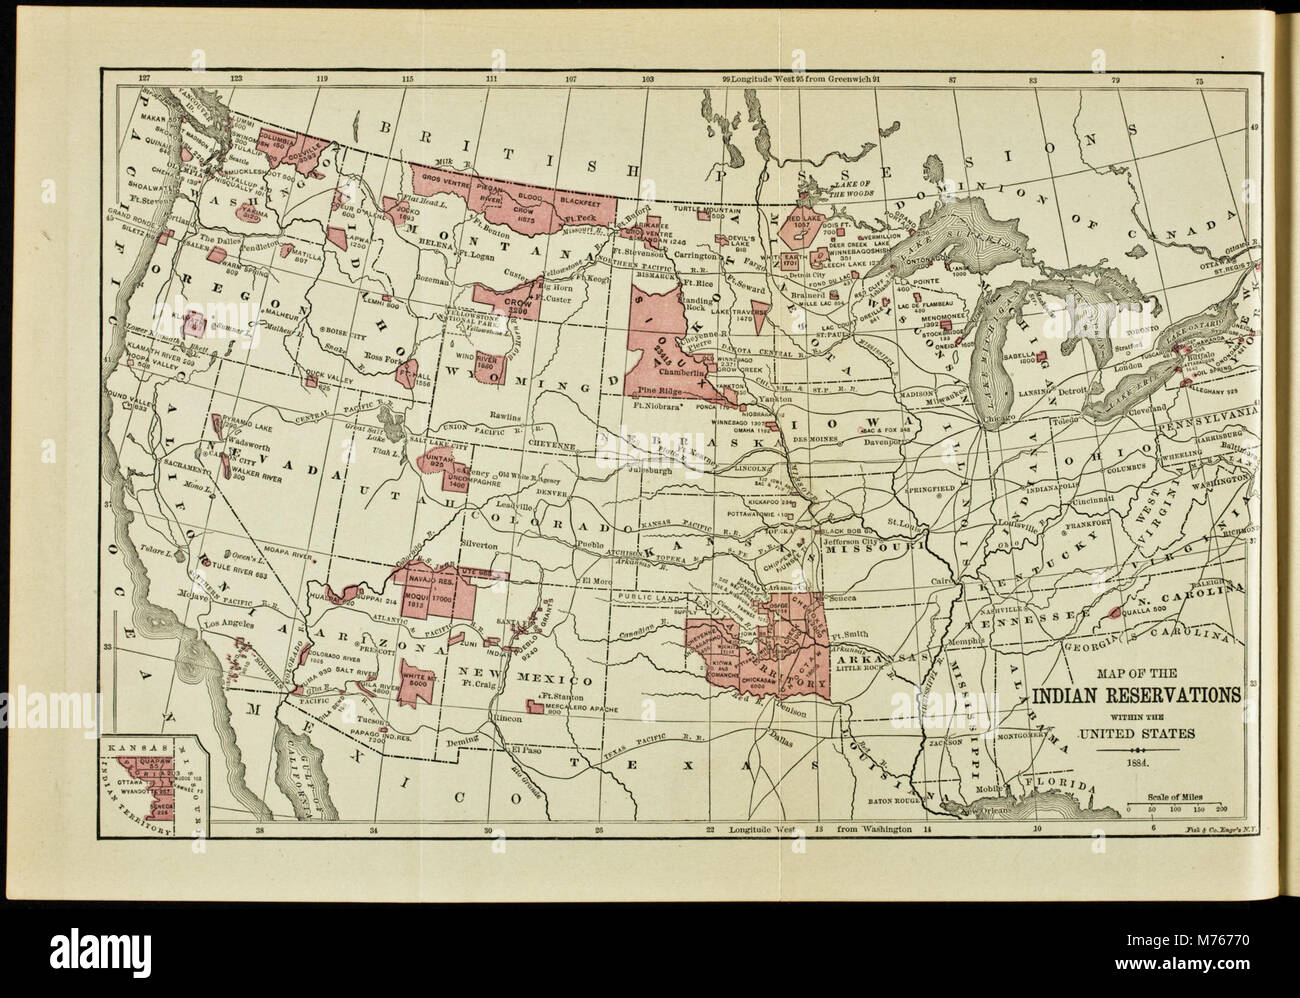 Map Of The Indian Reservations Within The United States 1884 Nby